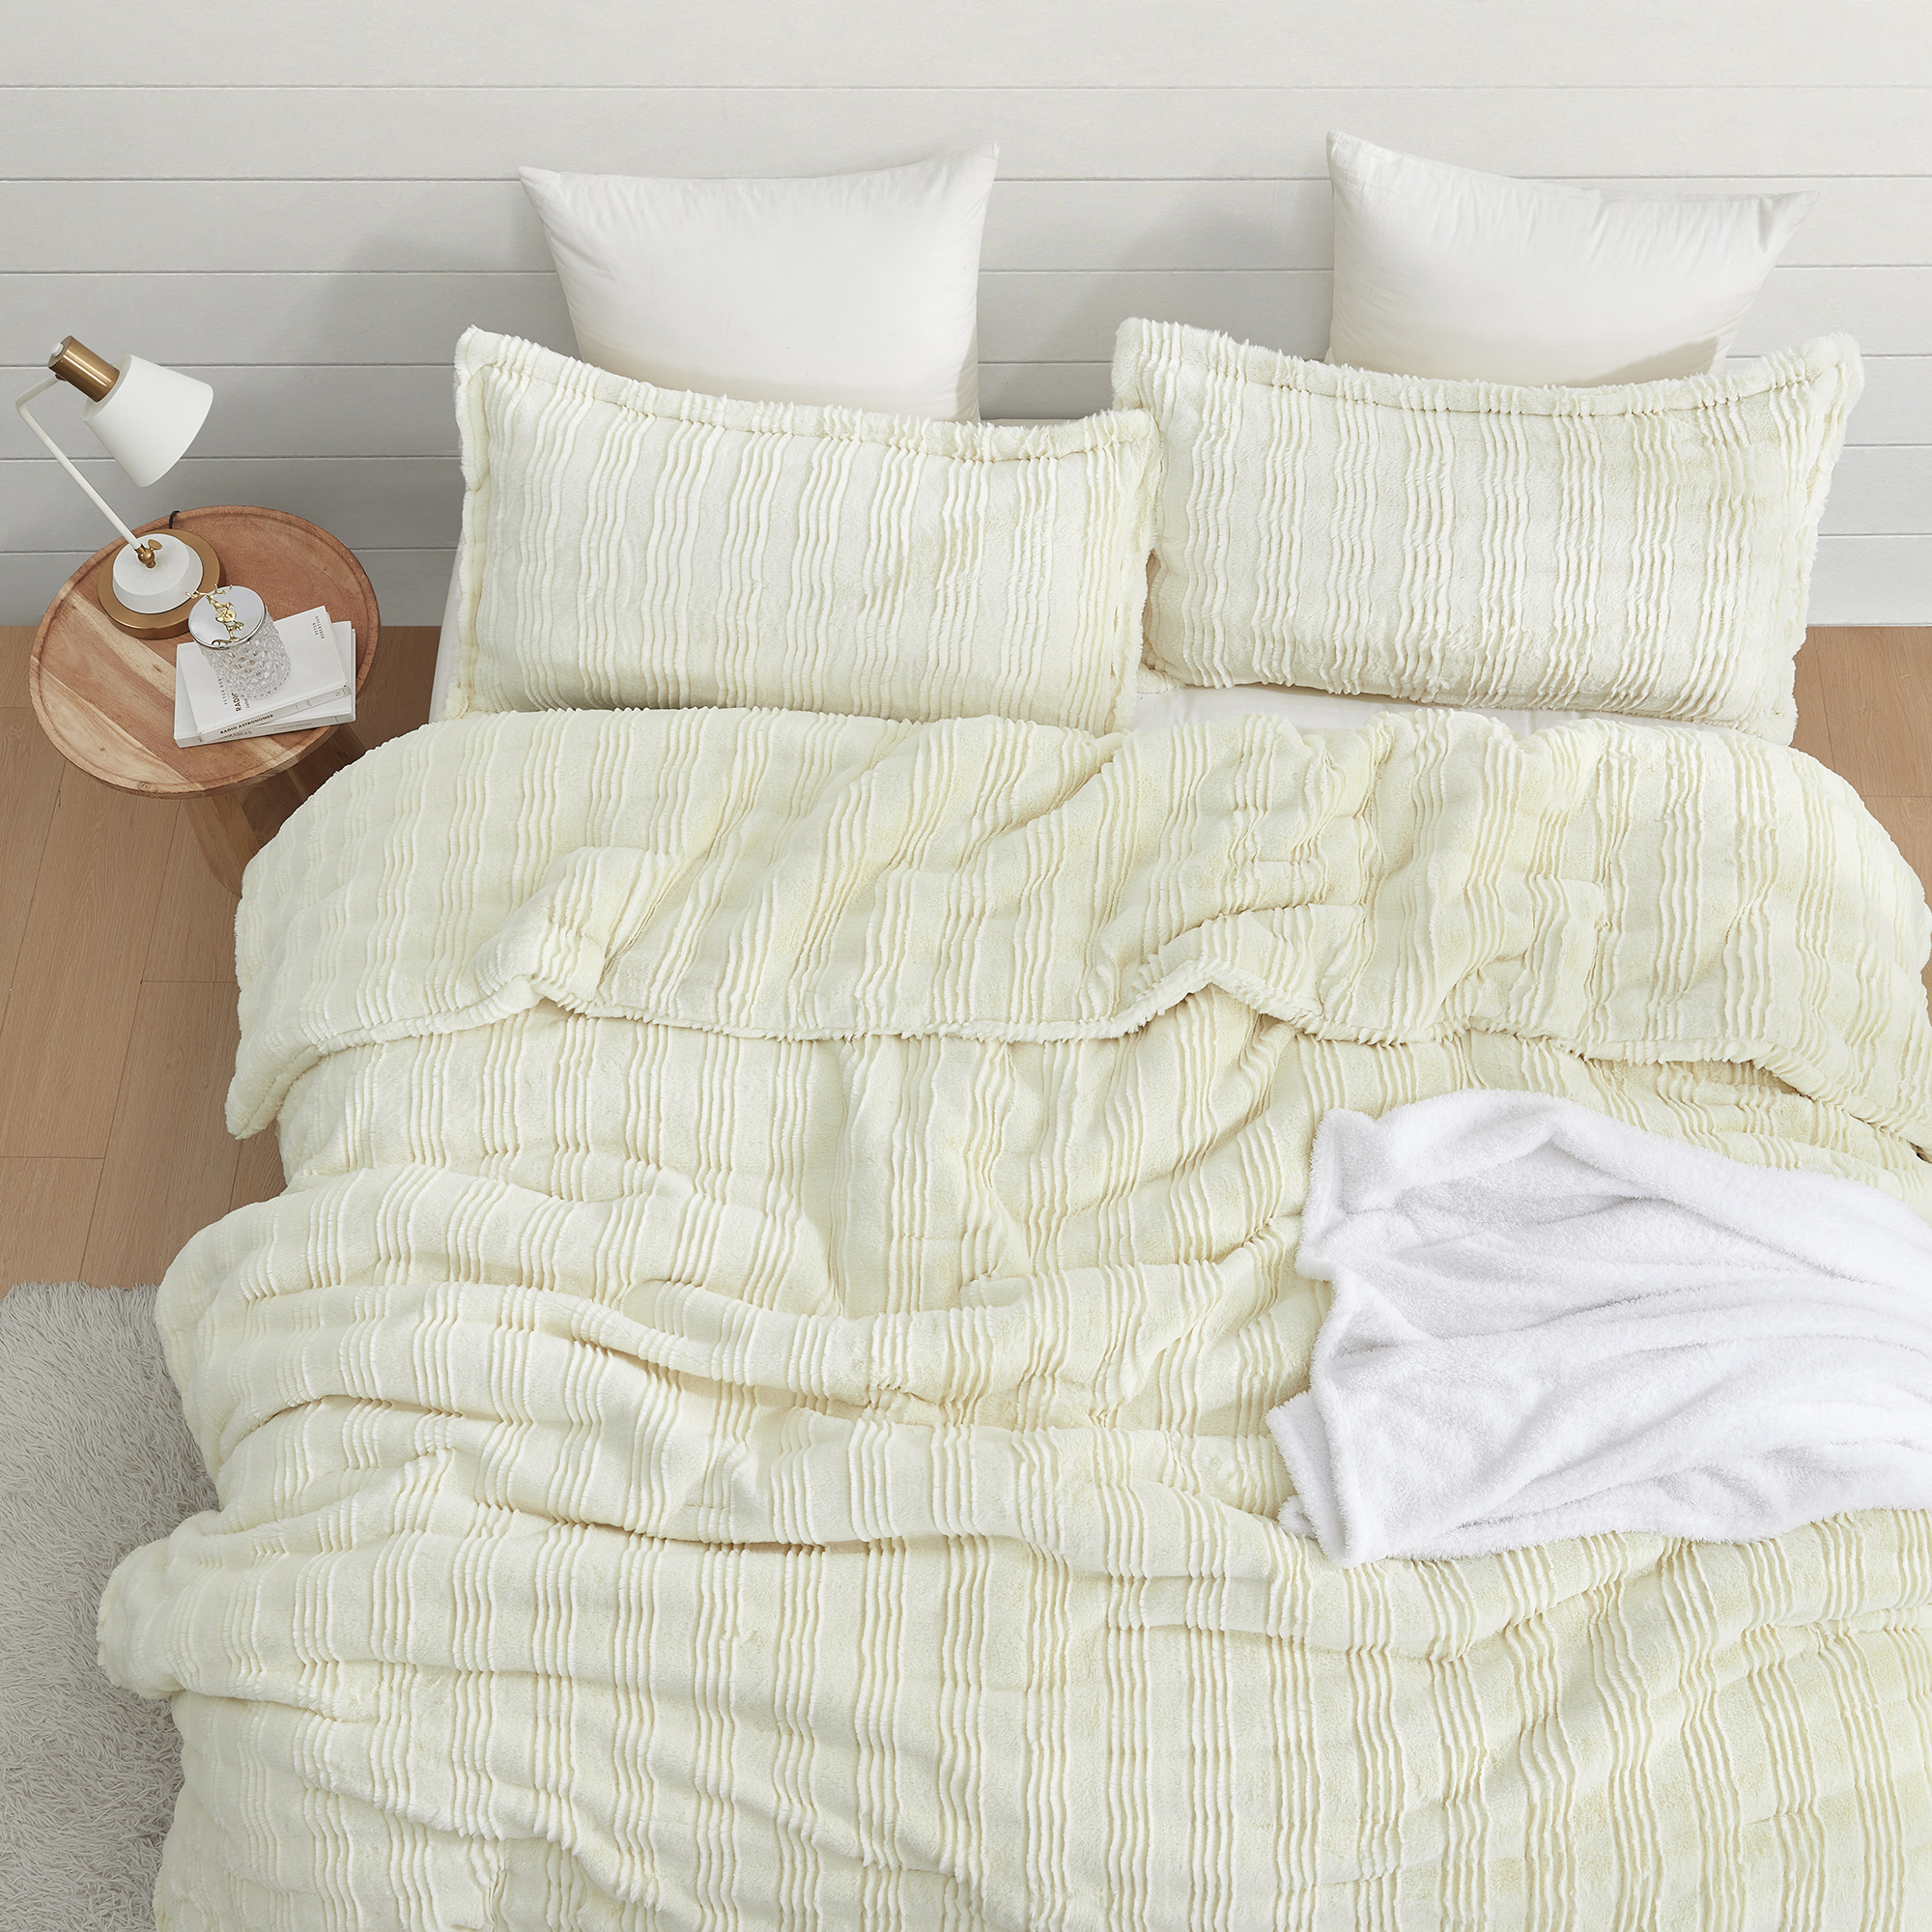 Cream of the Crop - Coma Inducer® Oversized Queen Comforter - Off White